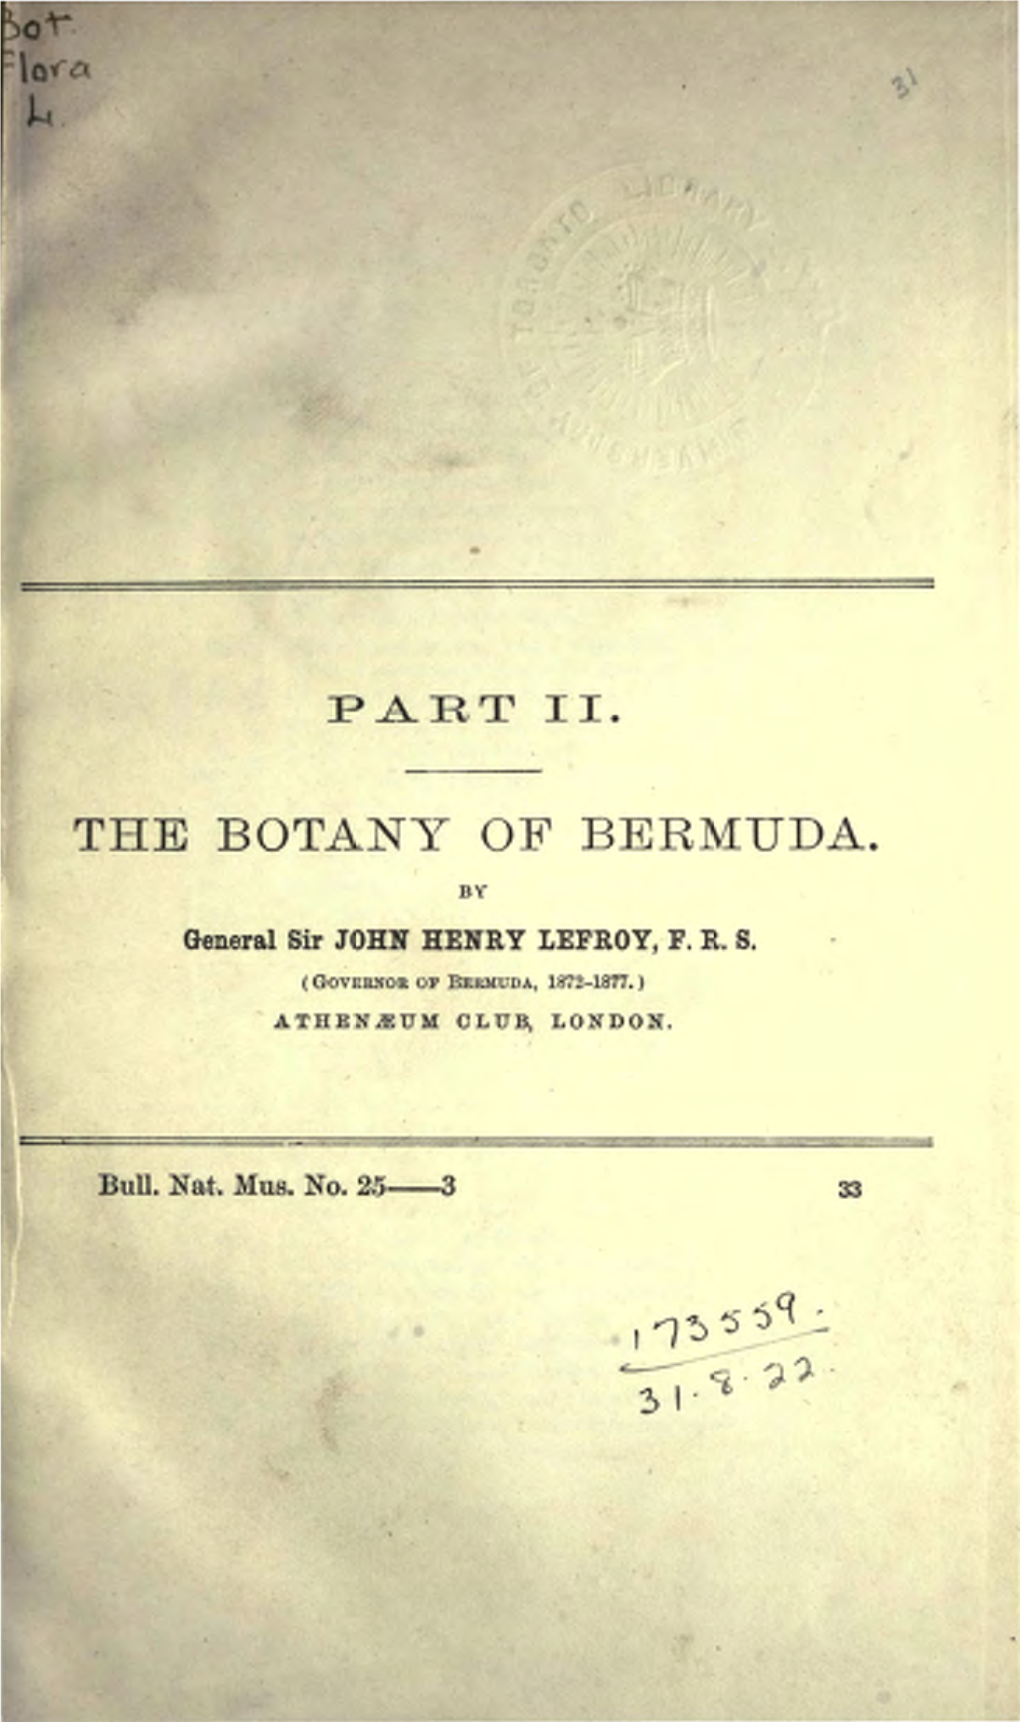 THE BOTANY of BERMUDA. by General Sir JOHN HENRY LEFROY, F